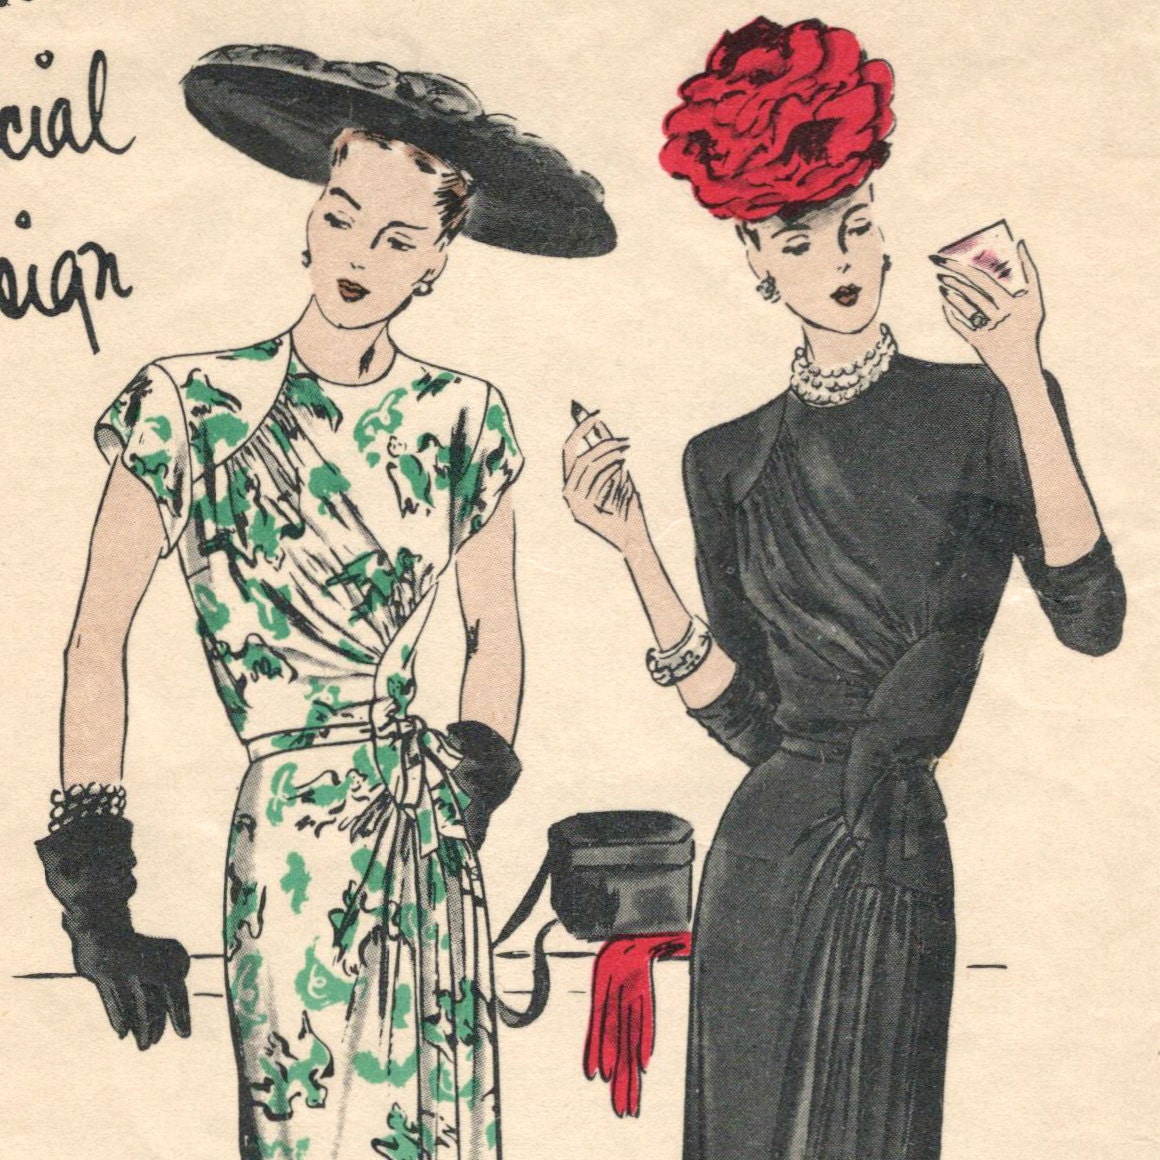 Vogue S-4641 1940s cocktail dress pattern with hats!